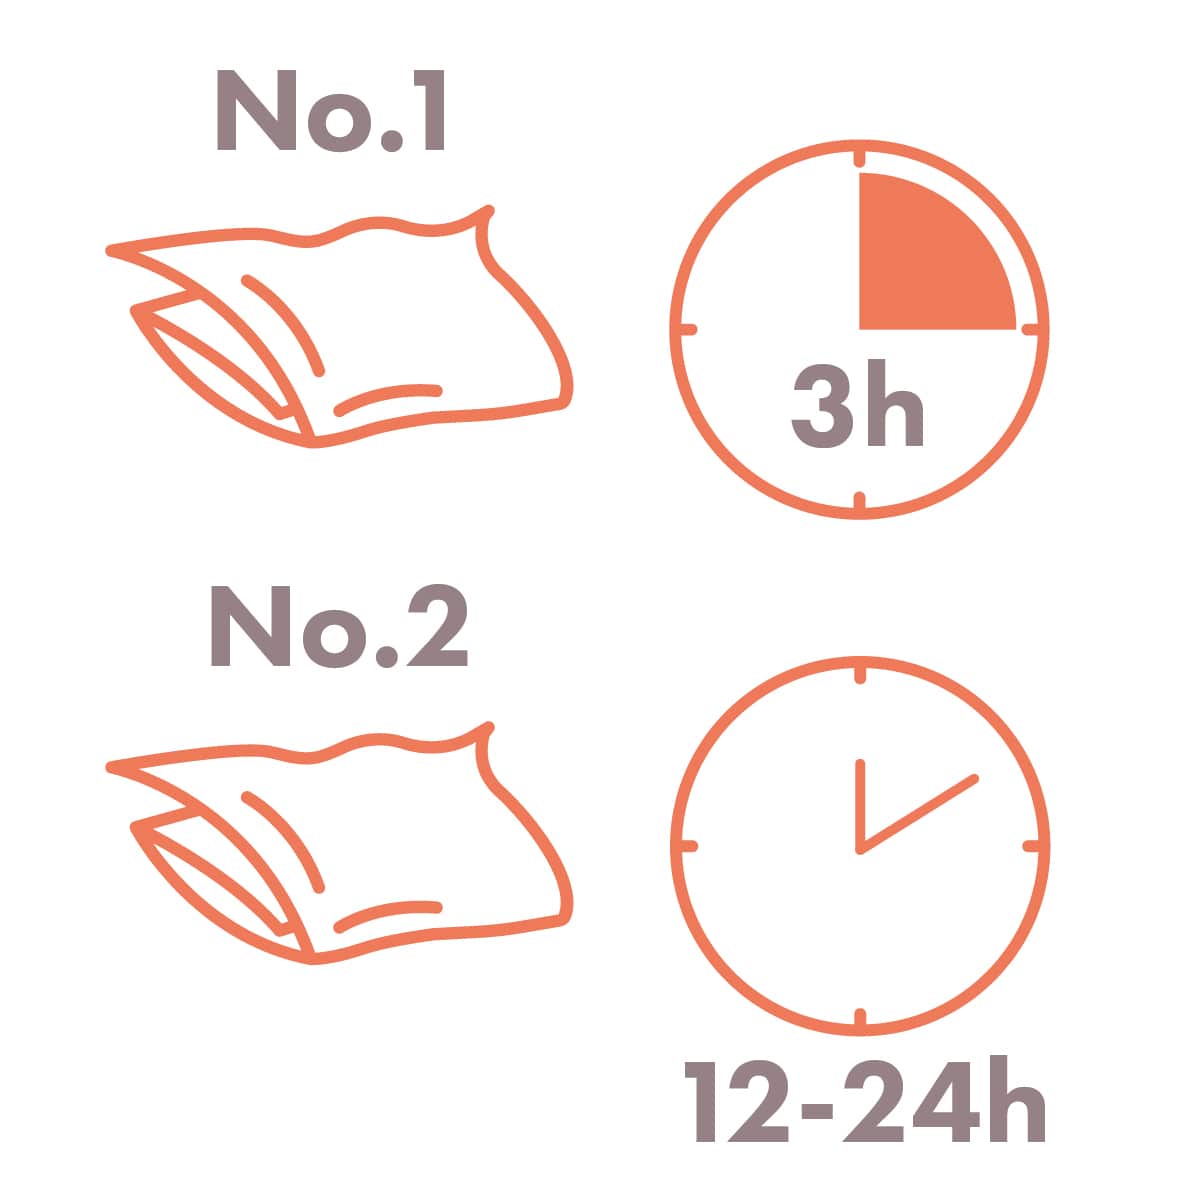 Detailed in white and orange, Step 6 of the Marble Care Program displays the need to give a minimum of 3 hours between coats and 24 hours before use